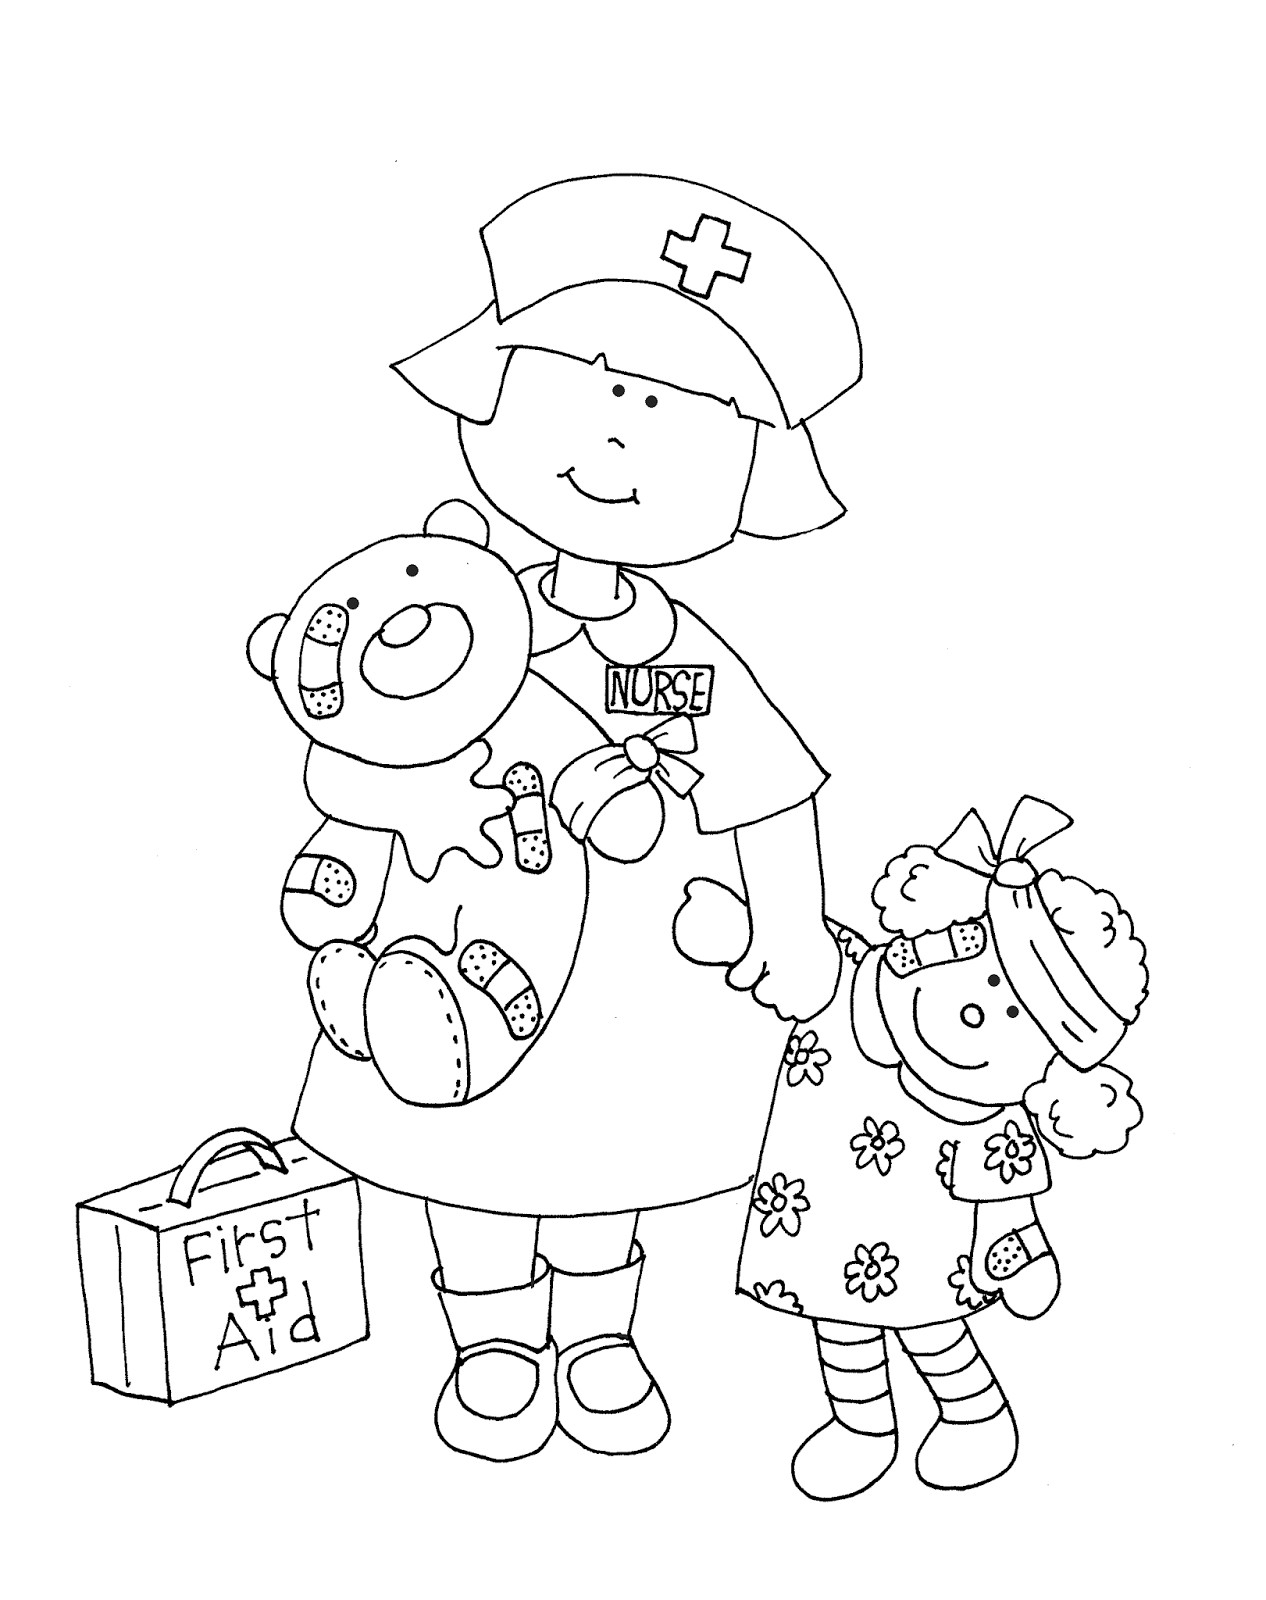 Coloring page: Nurse (Jobs) #170409 - Free Printable Coloring Pages